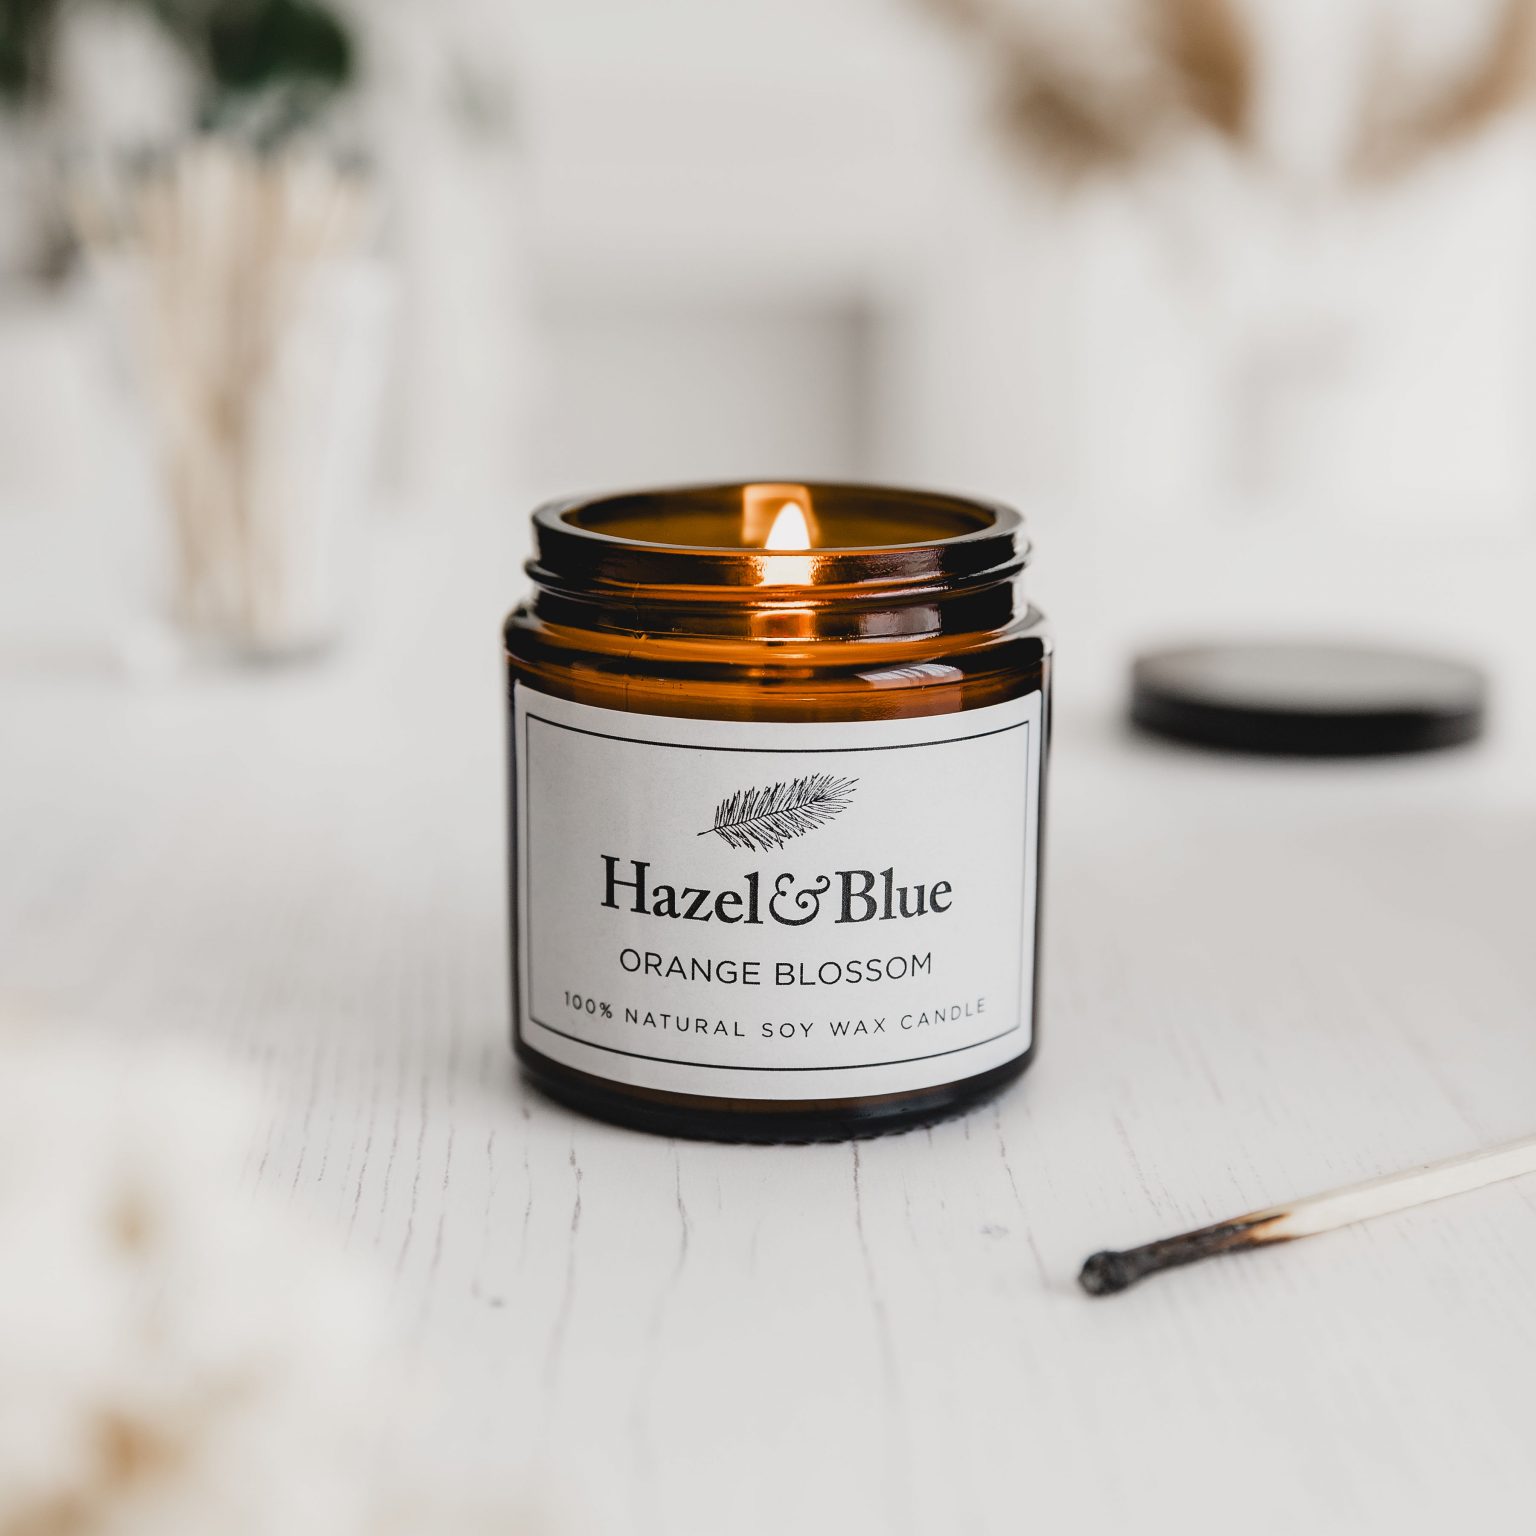 orange blossom citrus scented soy candle spring scented soy candles fresh citrus Clean scented eco friendly non toxic had poured soy candles uk